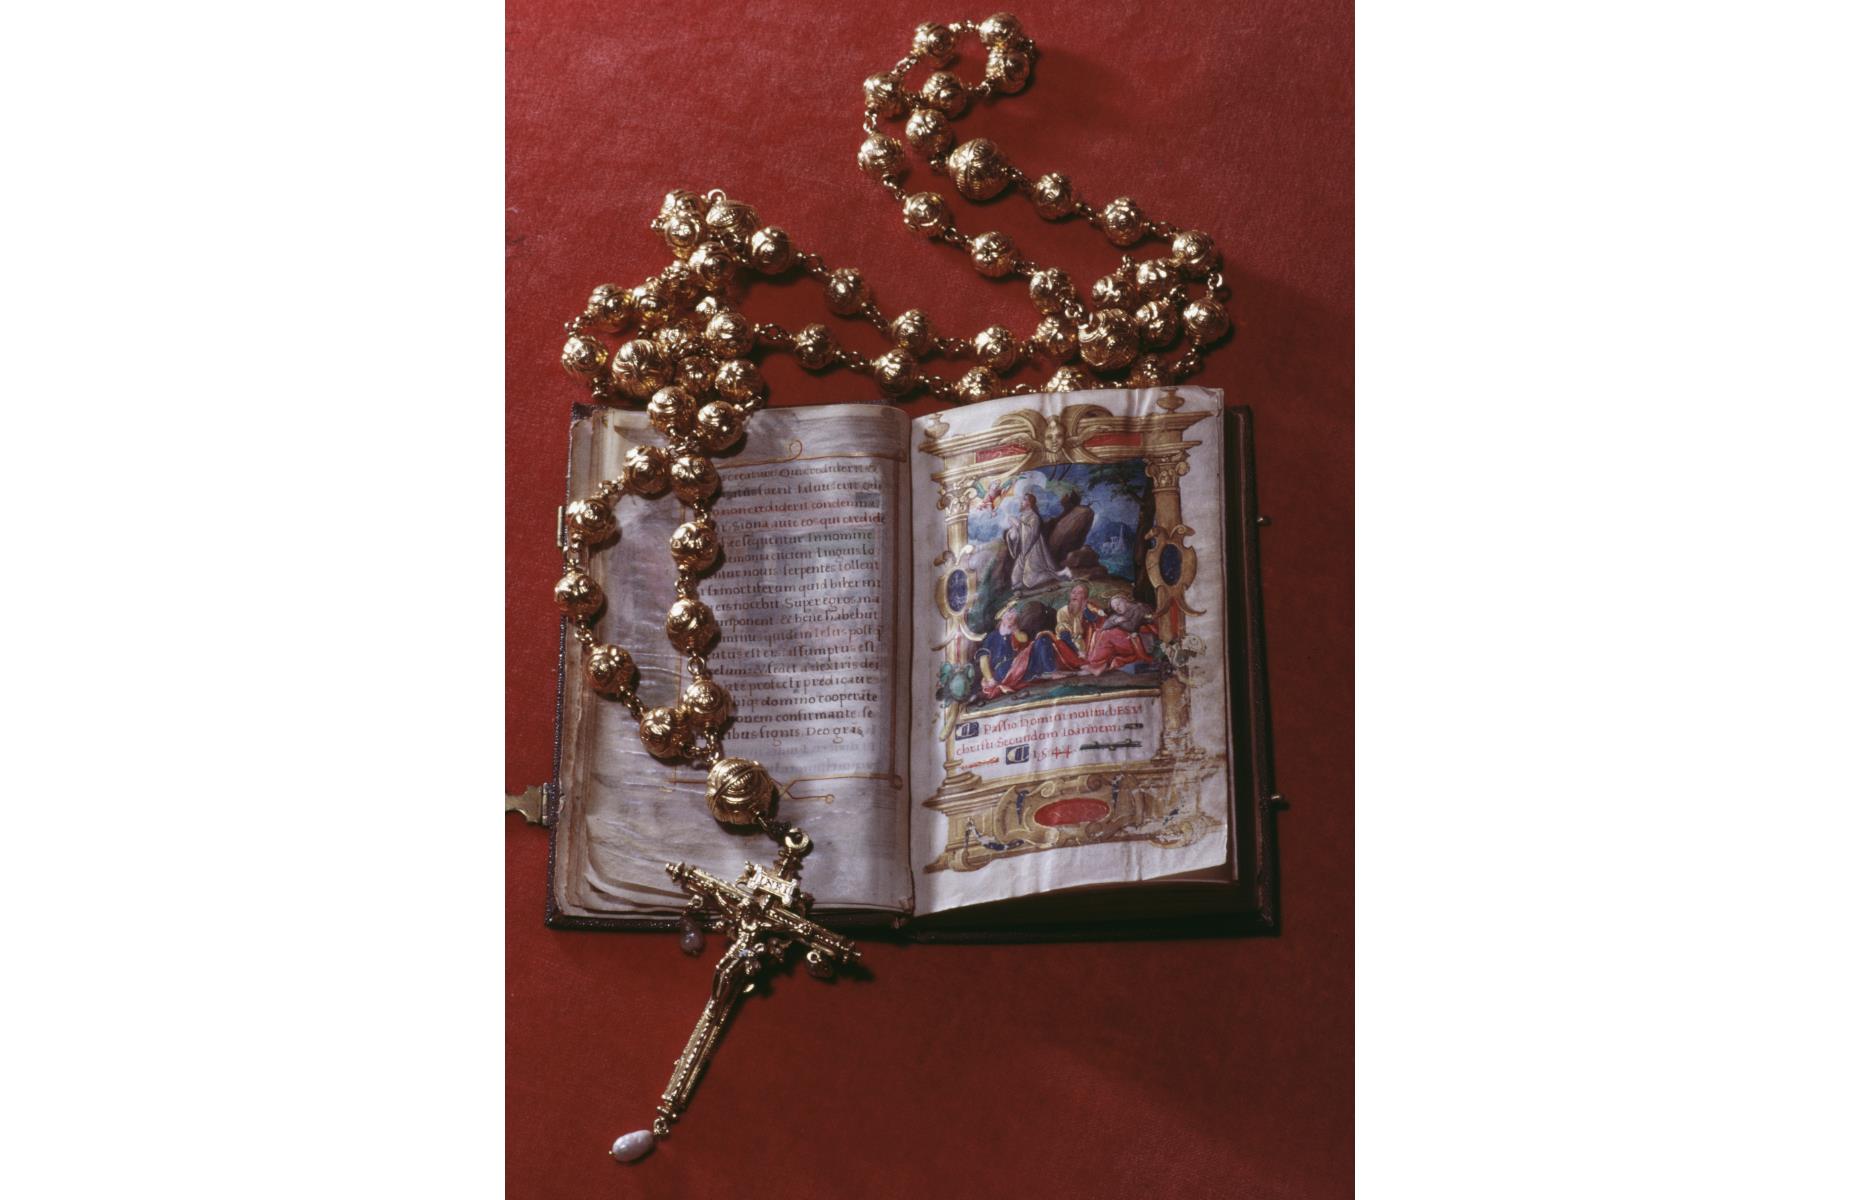 Mary Queen of Scots' rosary beads (and other treasures)